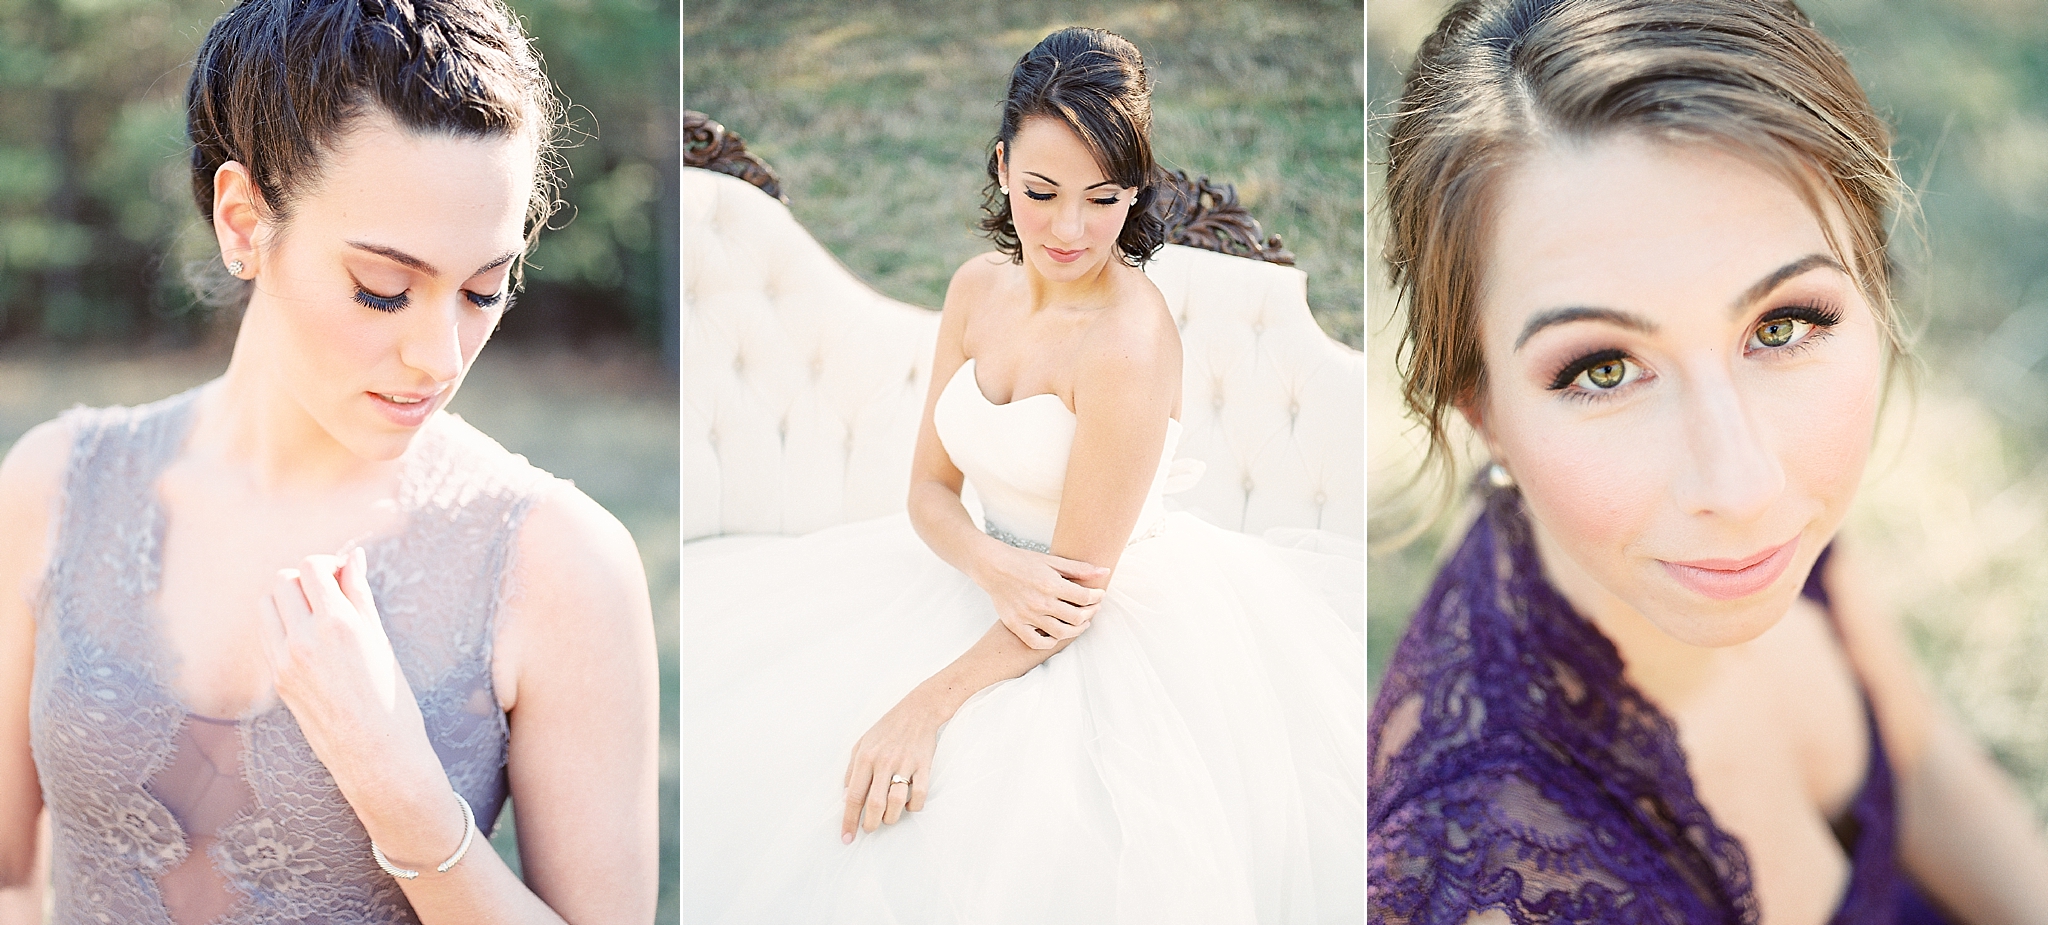 This Washington, DC wedding photographer gives advice to future brides on why they should hire a professional hair and makeup artist for their big day. 